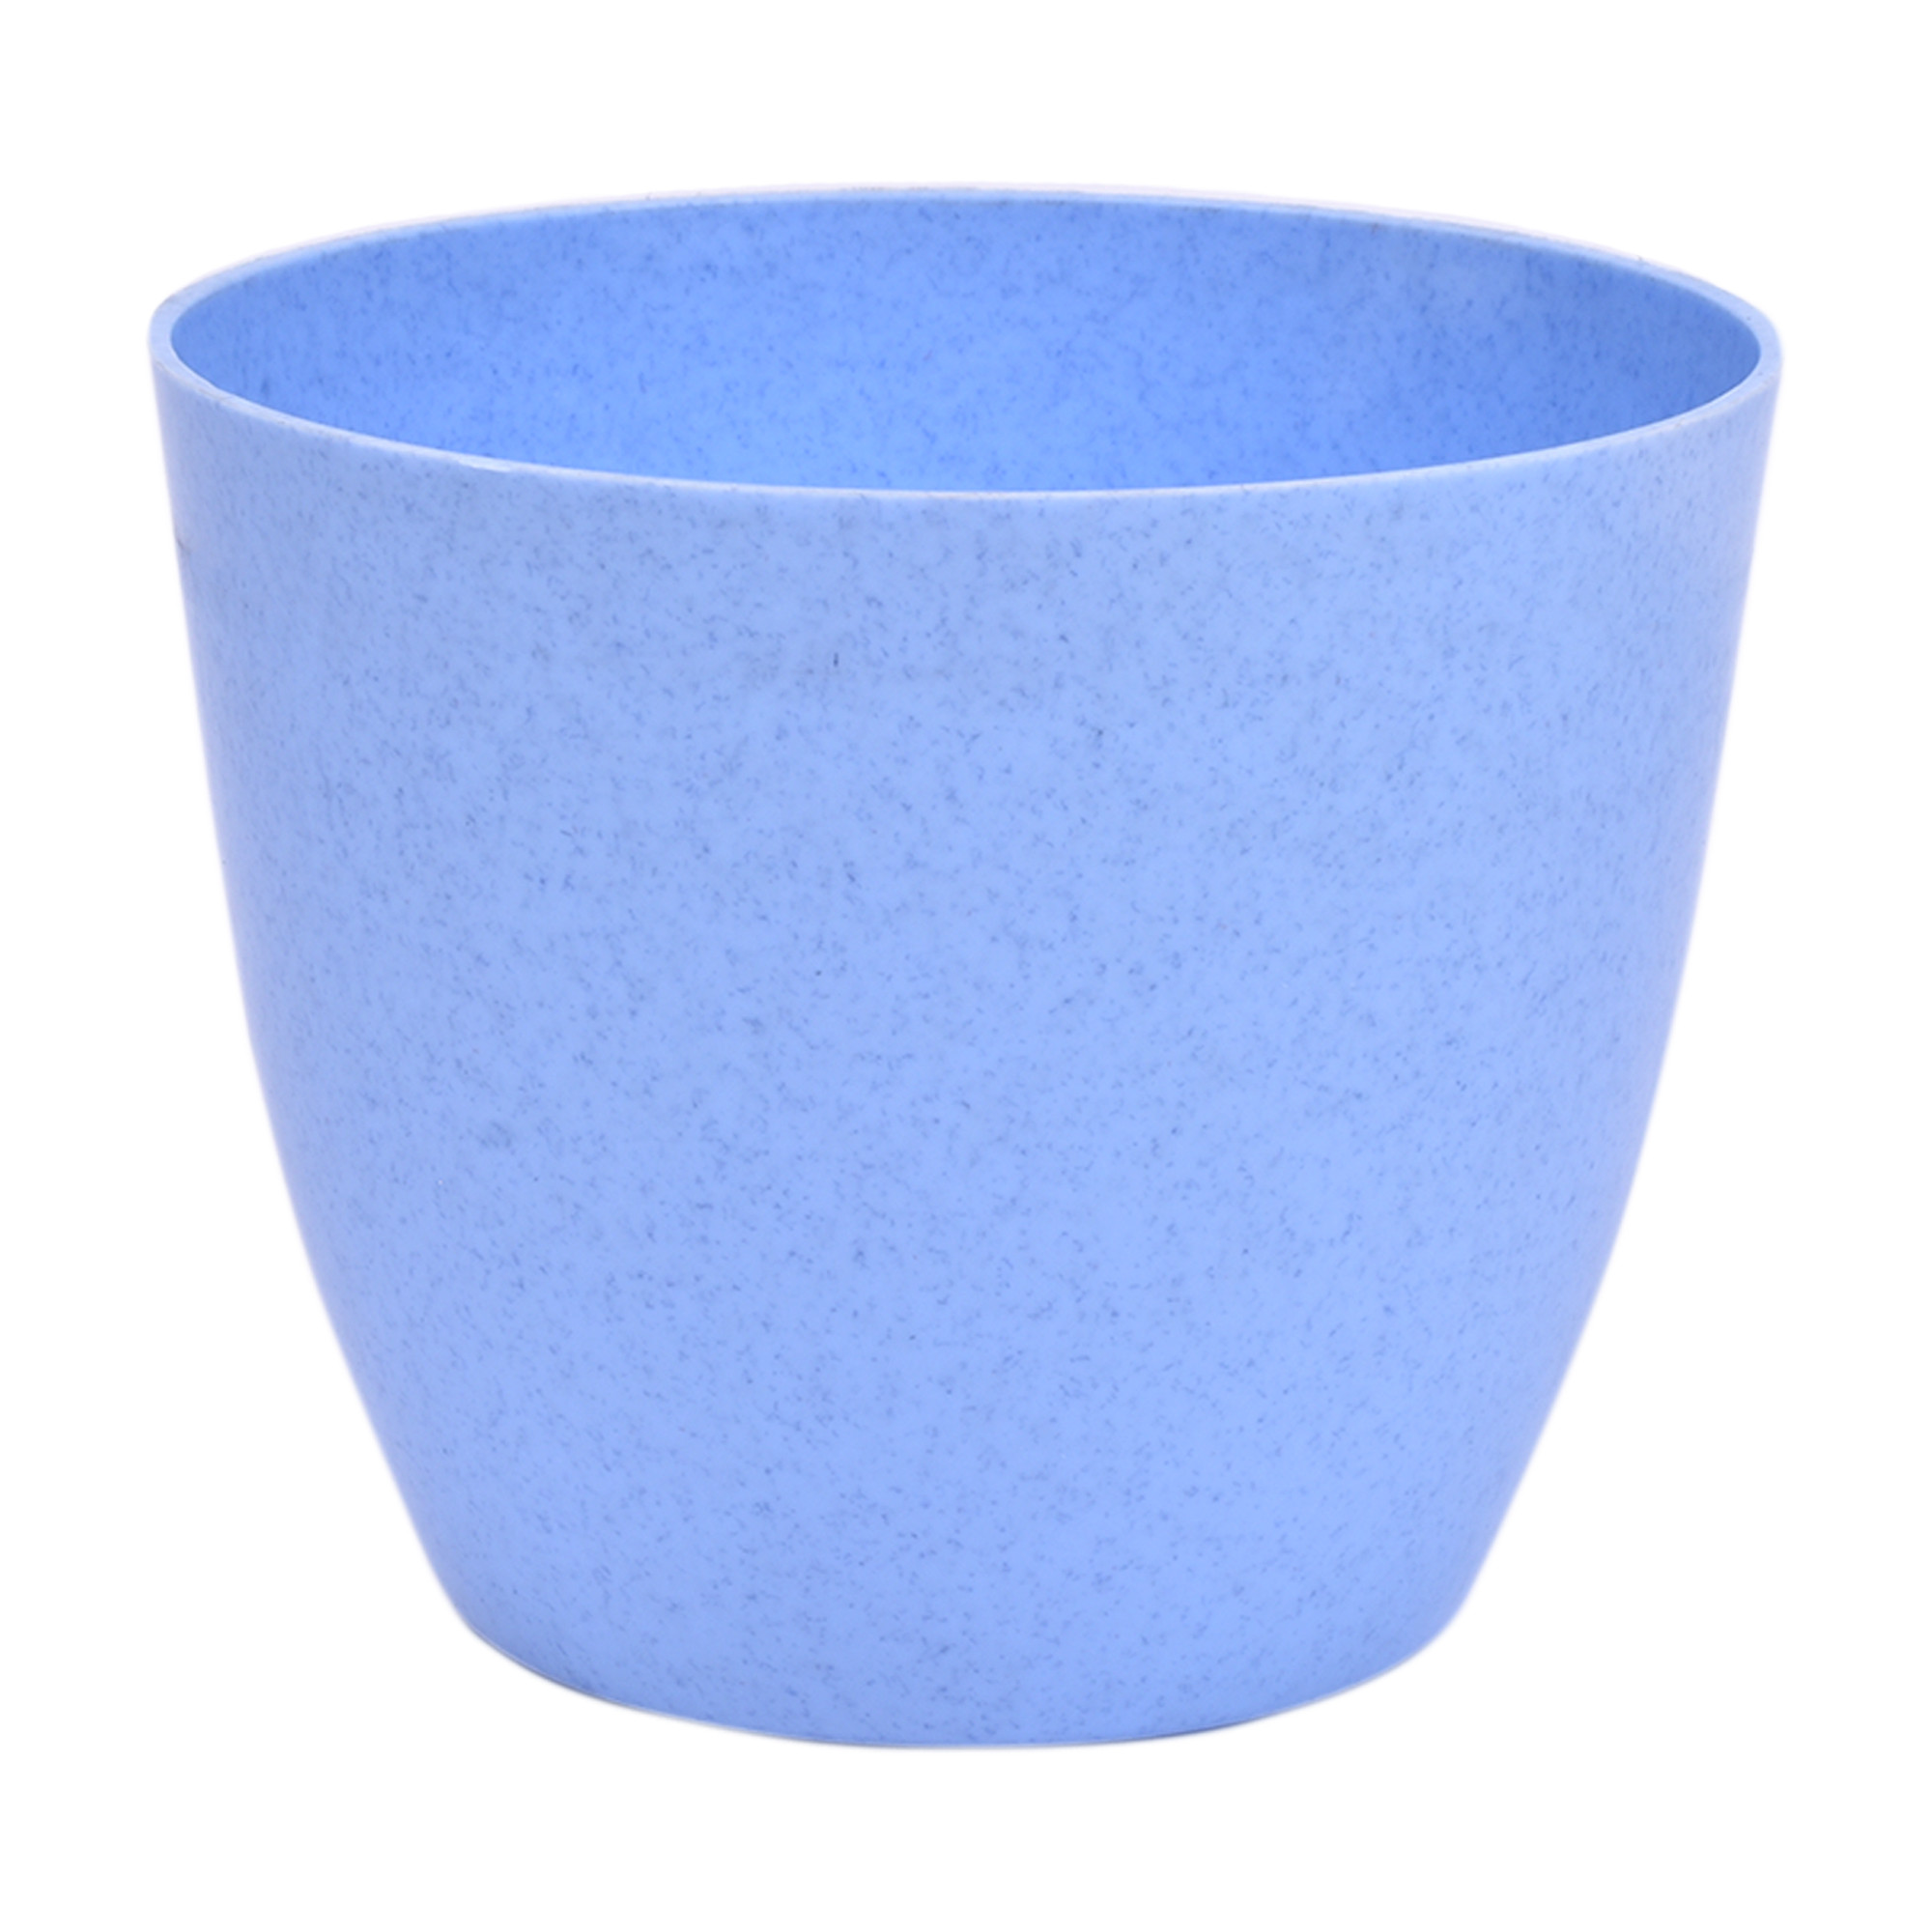 Kuber Industries Flower Pot | Flower Pot for Living Room-Office | Flower Planters for Home-office-Lawns & Garden Décor | Planters Pots for Balcony | Marble Cool | 5 Inch | Blue & White